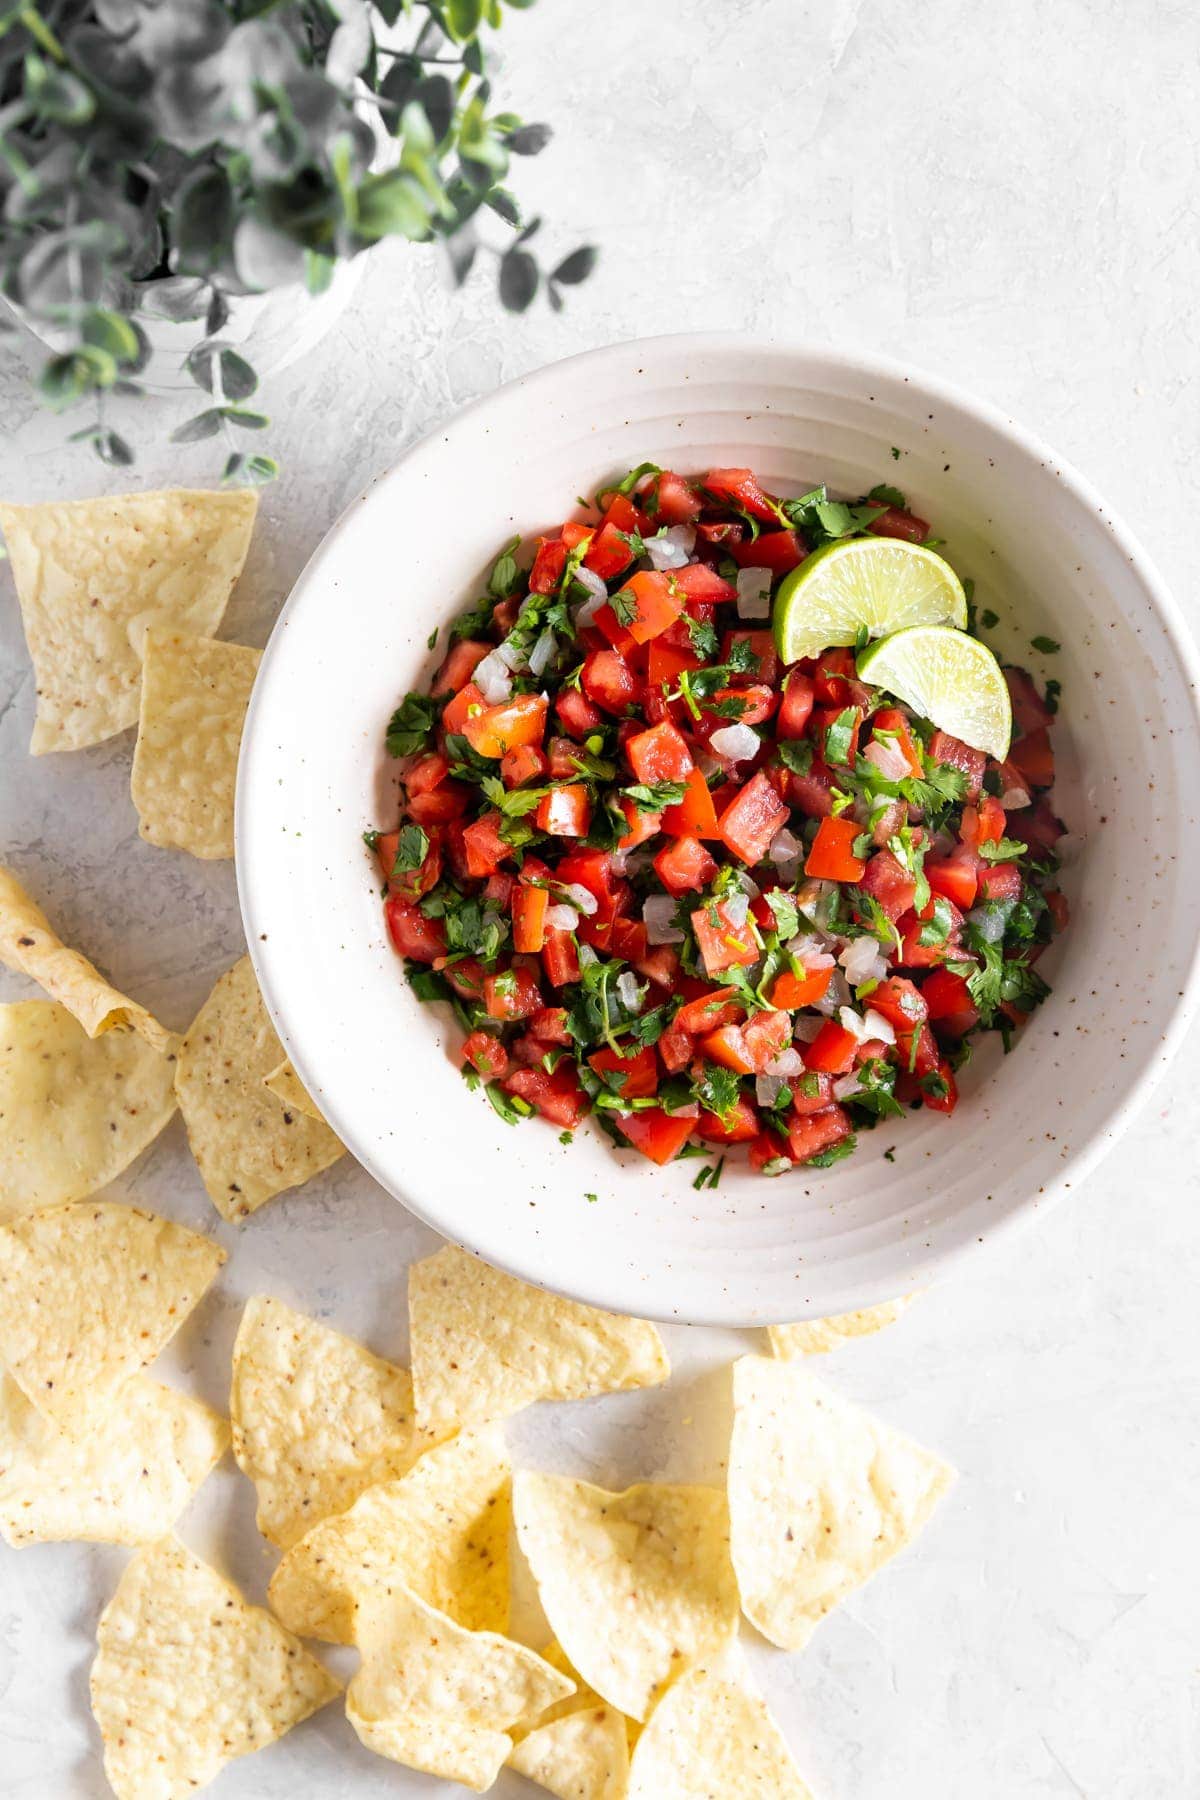 top view of the pico de gallo in a white bowl with tortilla chips